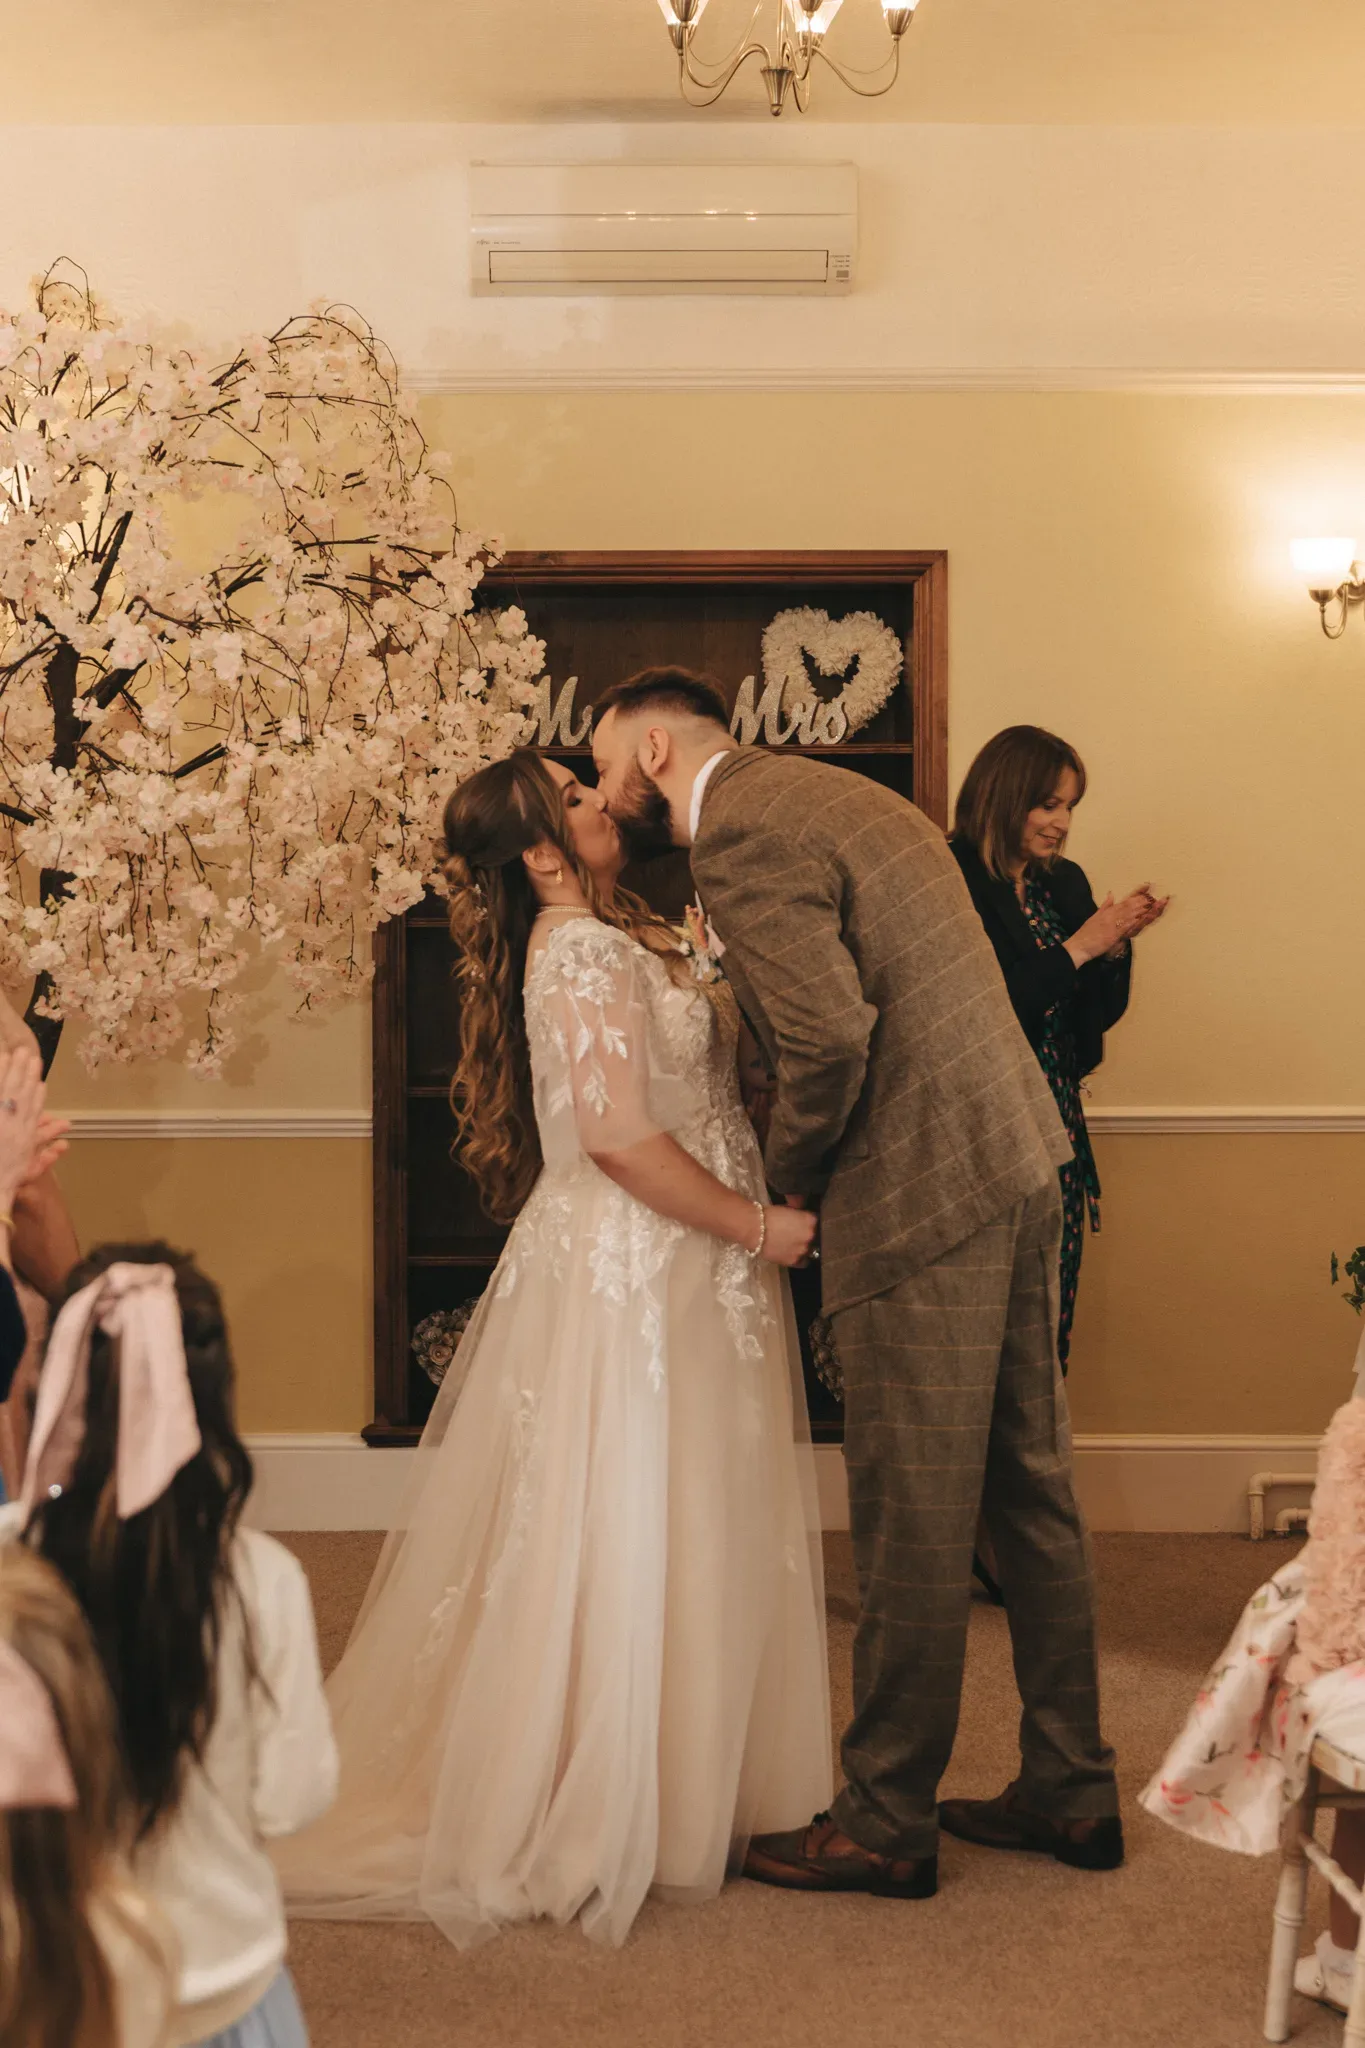 A bride and groom share a kiss under a cherry blossom tree indoors, surrounded by guests. the bride is in a lace gown, and the groom wears a tweed suit. decor includes "mr & mrs" signs.